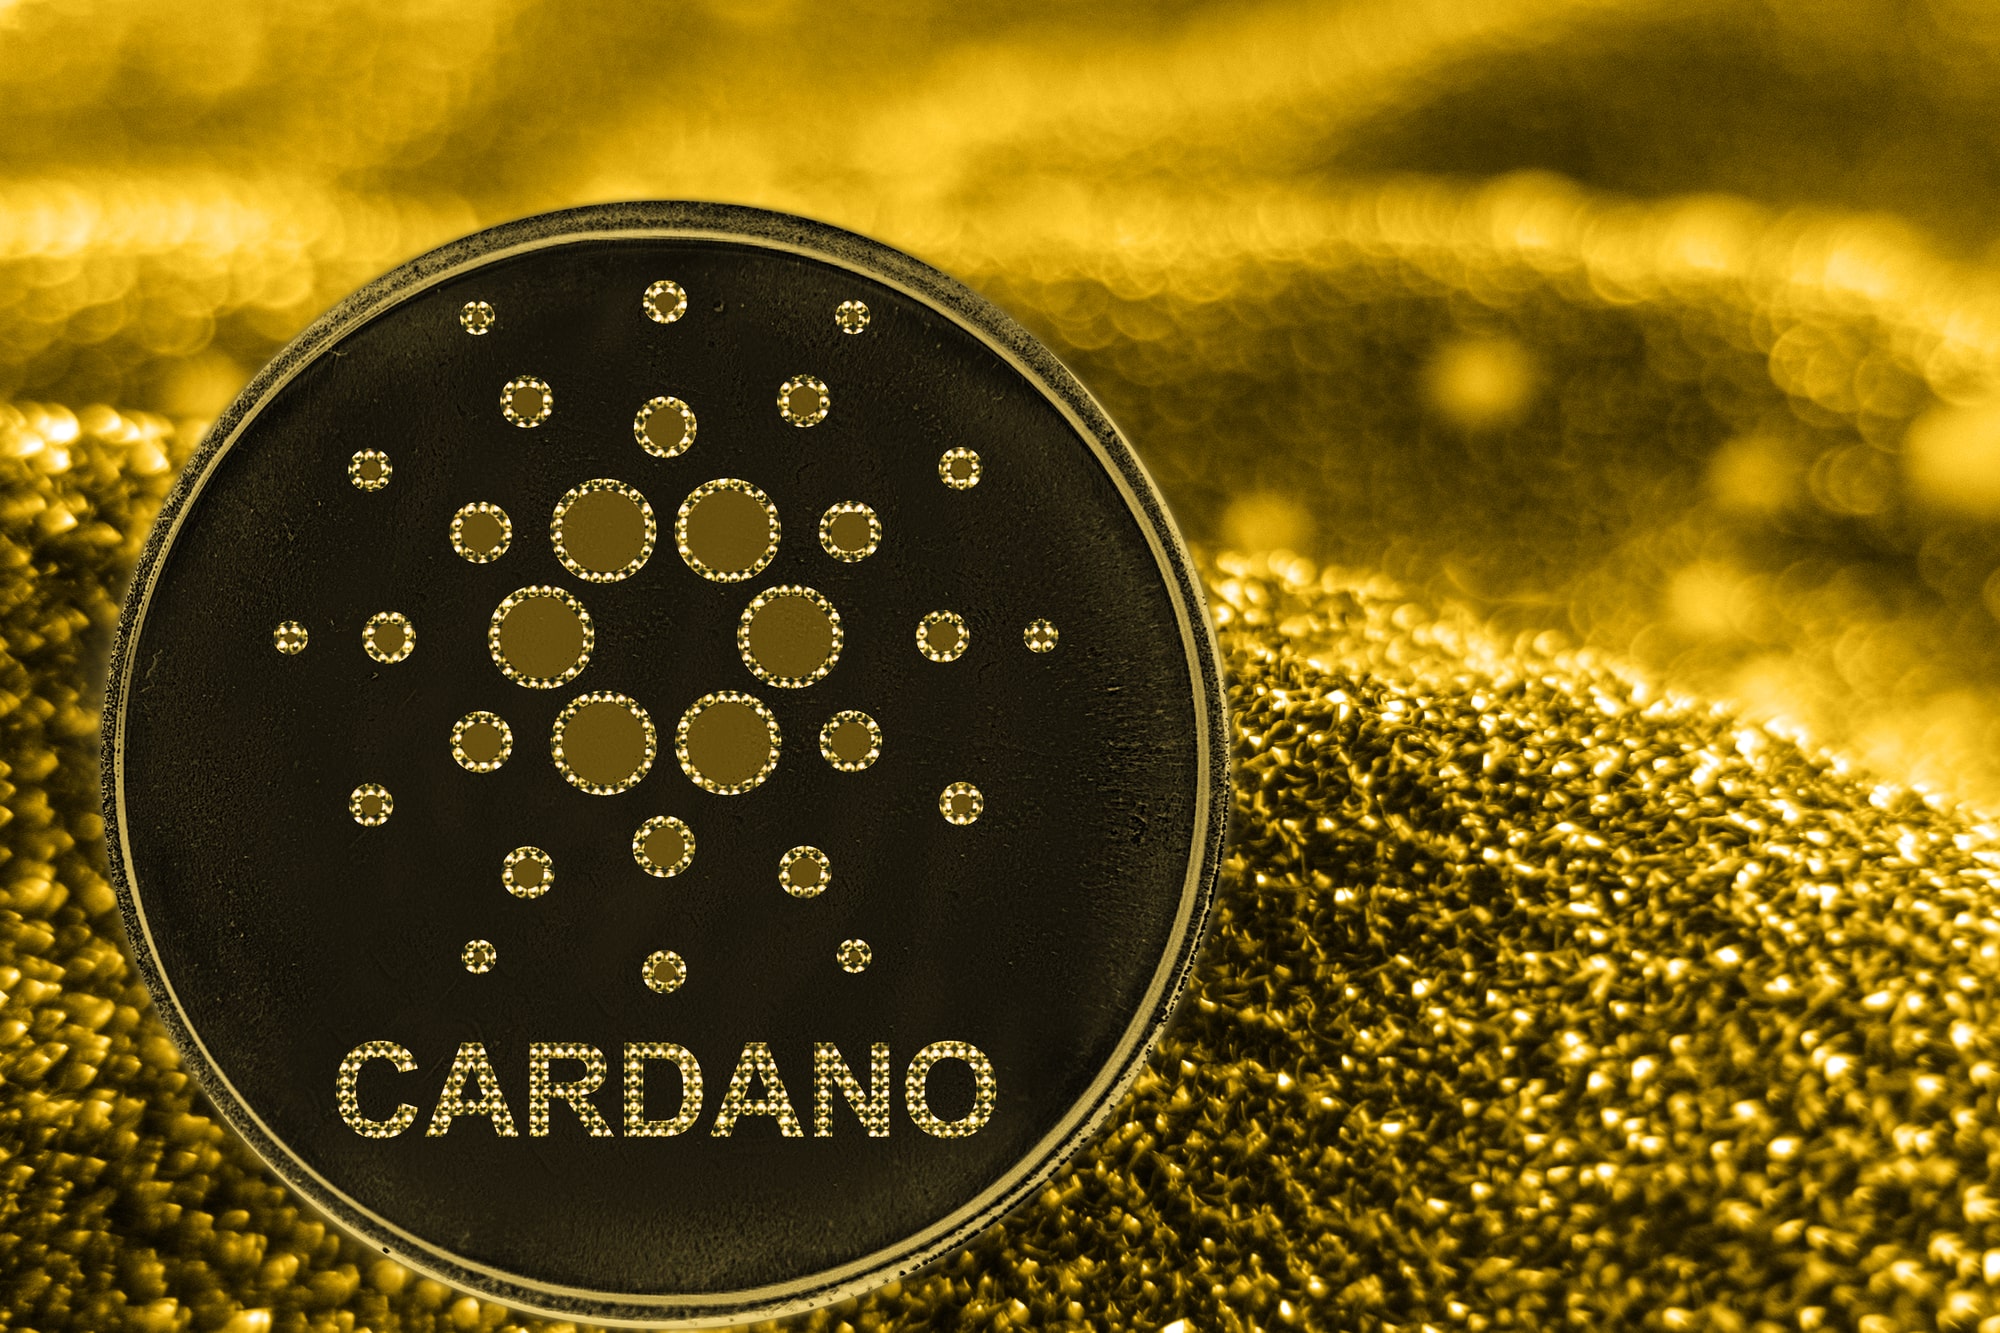 Cardano reaches a new all-time high, becoming the third-largest crypto